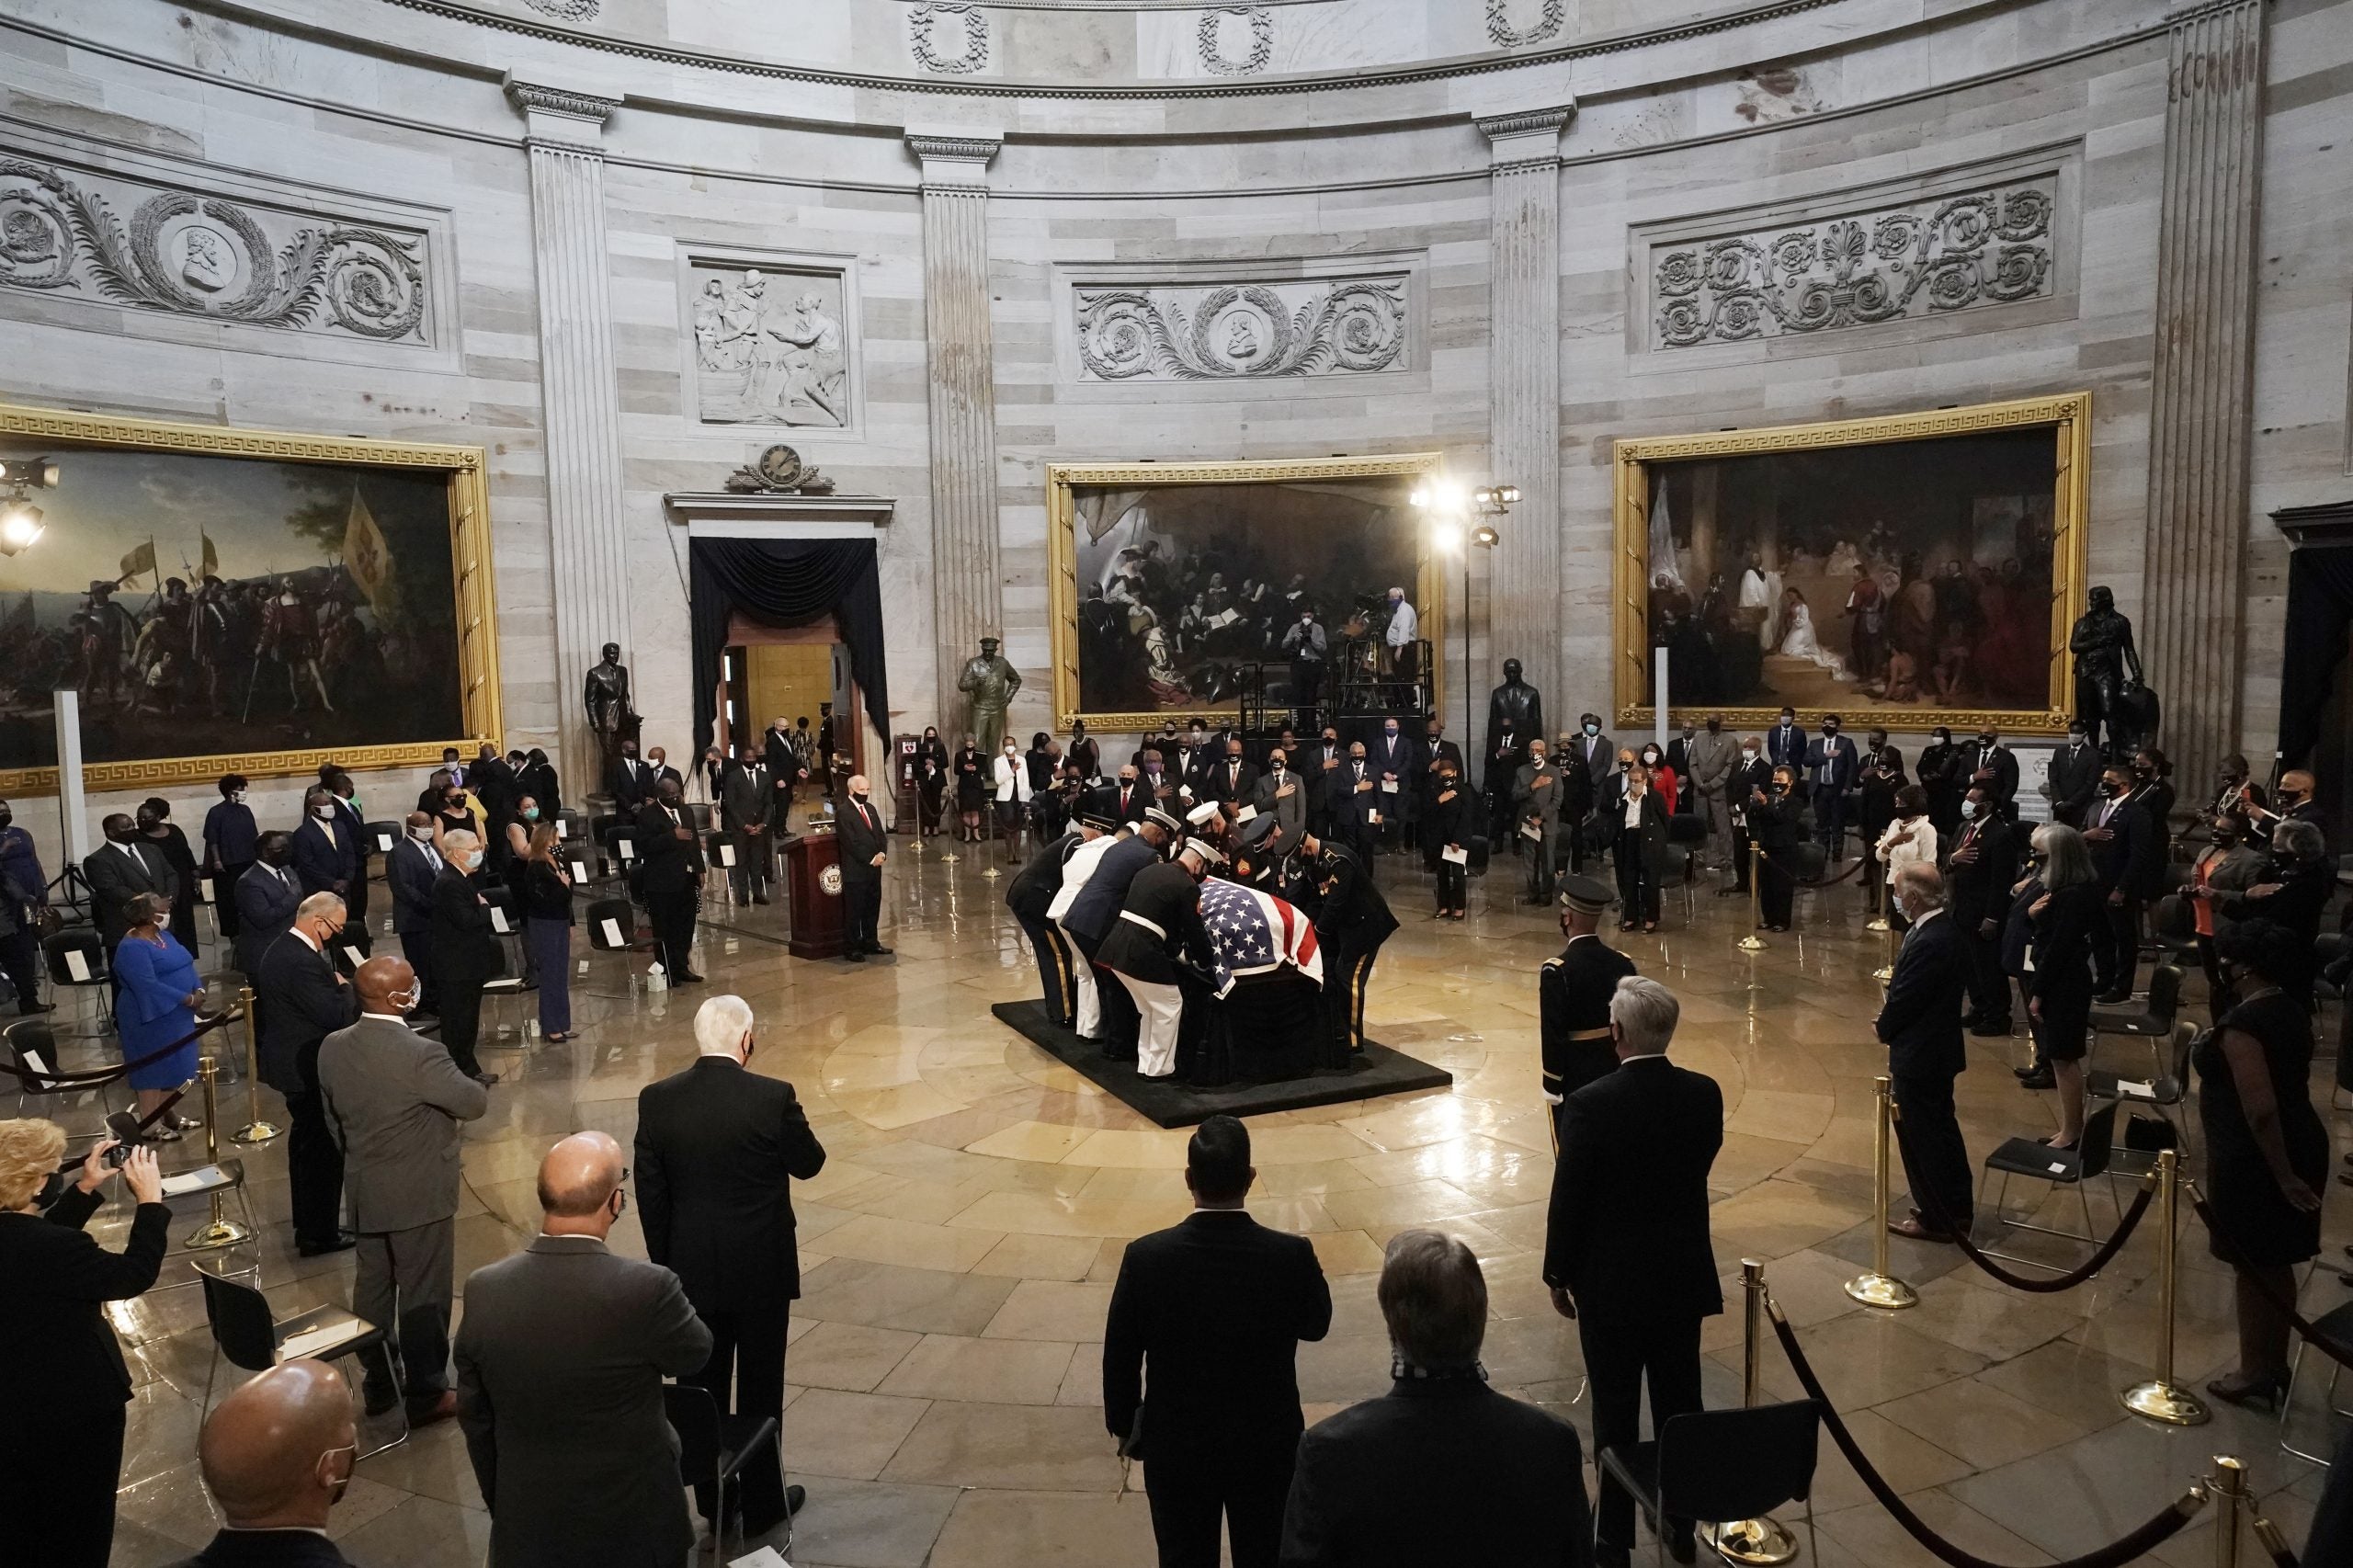 WASHINGTON, DC - JULY 27: The flag-draped casket of the late Rep. John Lewis (D-GA) is placed on the catafalque by a joint services military honor guard where it will lie is state in the Capitol Rotunda on July 27, 2020 in Washington, DC. Lewis, a civil rights icon and fierce advocate of voting rights for African Americans, will lie in state at the Capitol. Lewis died on July 17 at the age of 80. (Photo by J. Scott Applewhite - Pool/Getty Images)